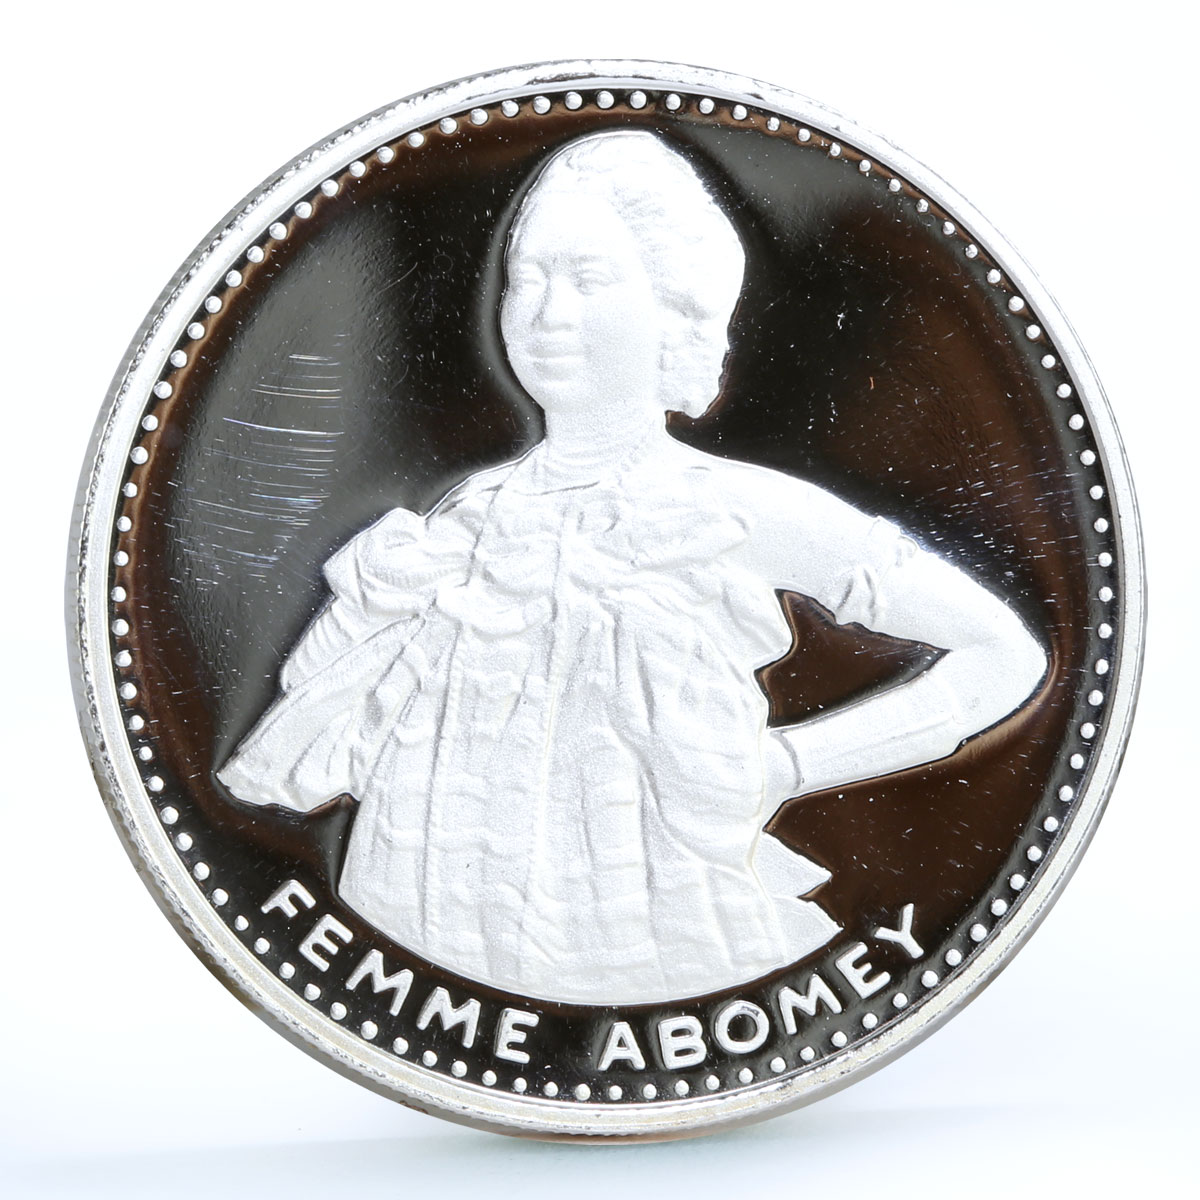 Benin Dahomey 200 francs 10 Years of Independece Abomey Woman silver coin 1971